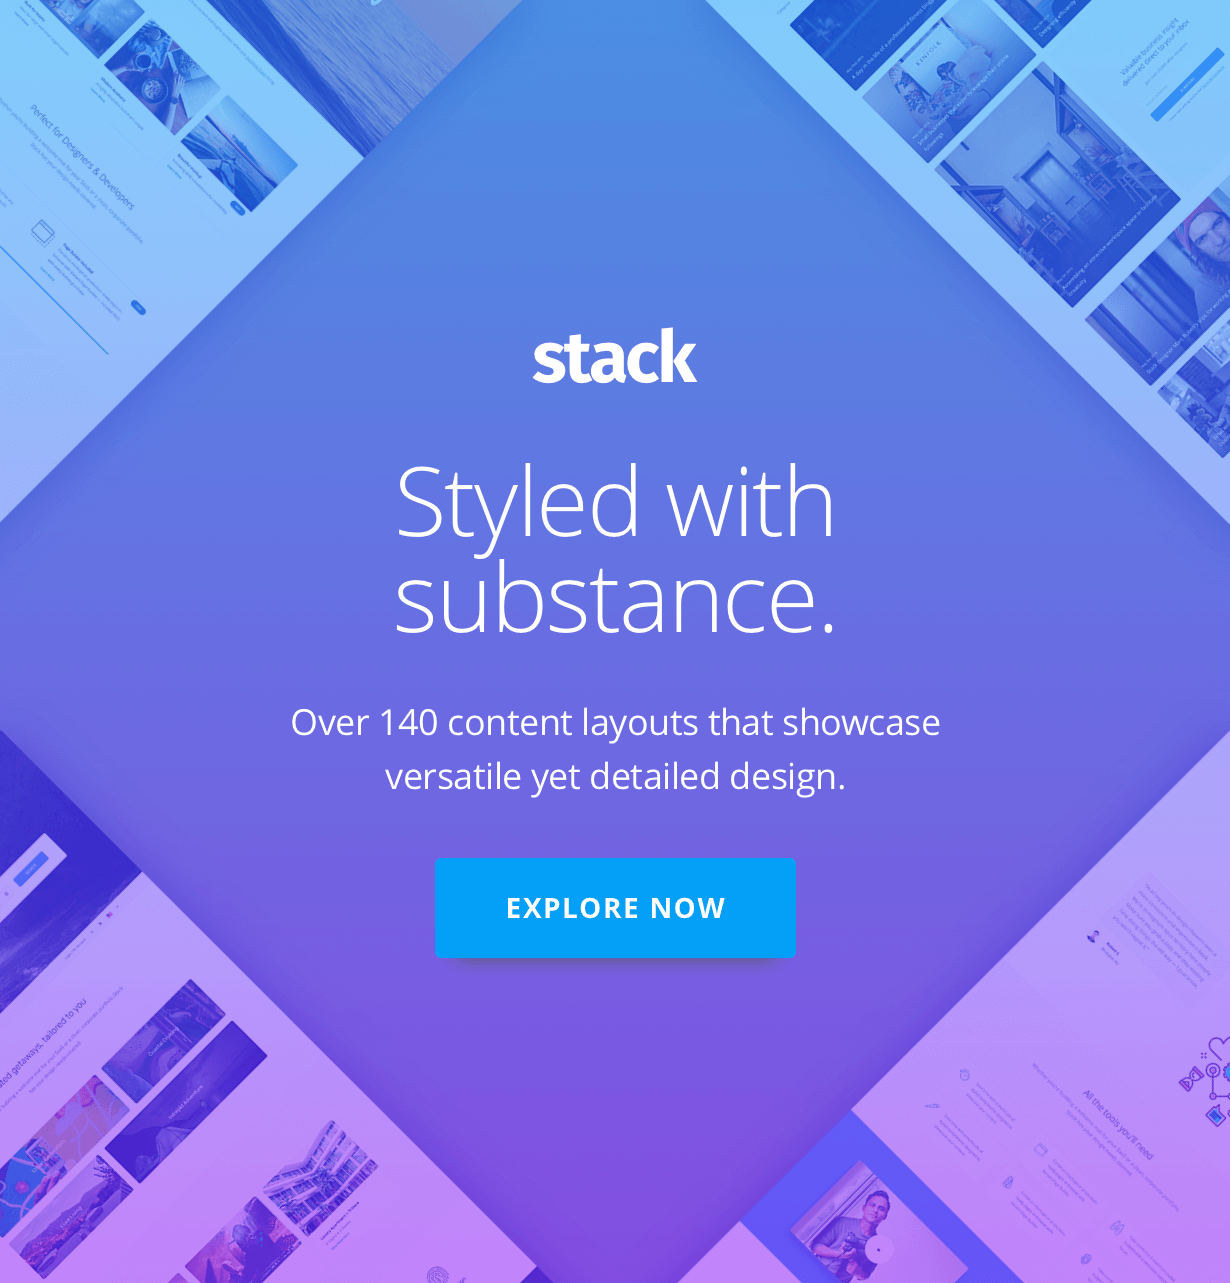 Stack over 140 content layouts